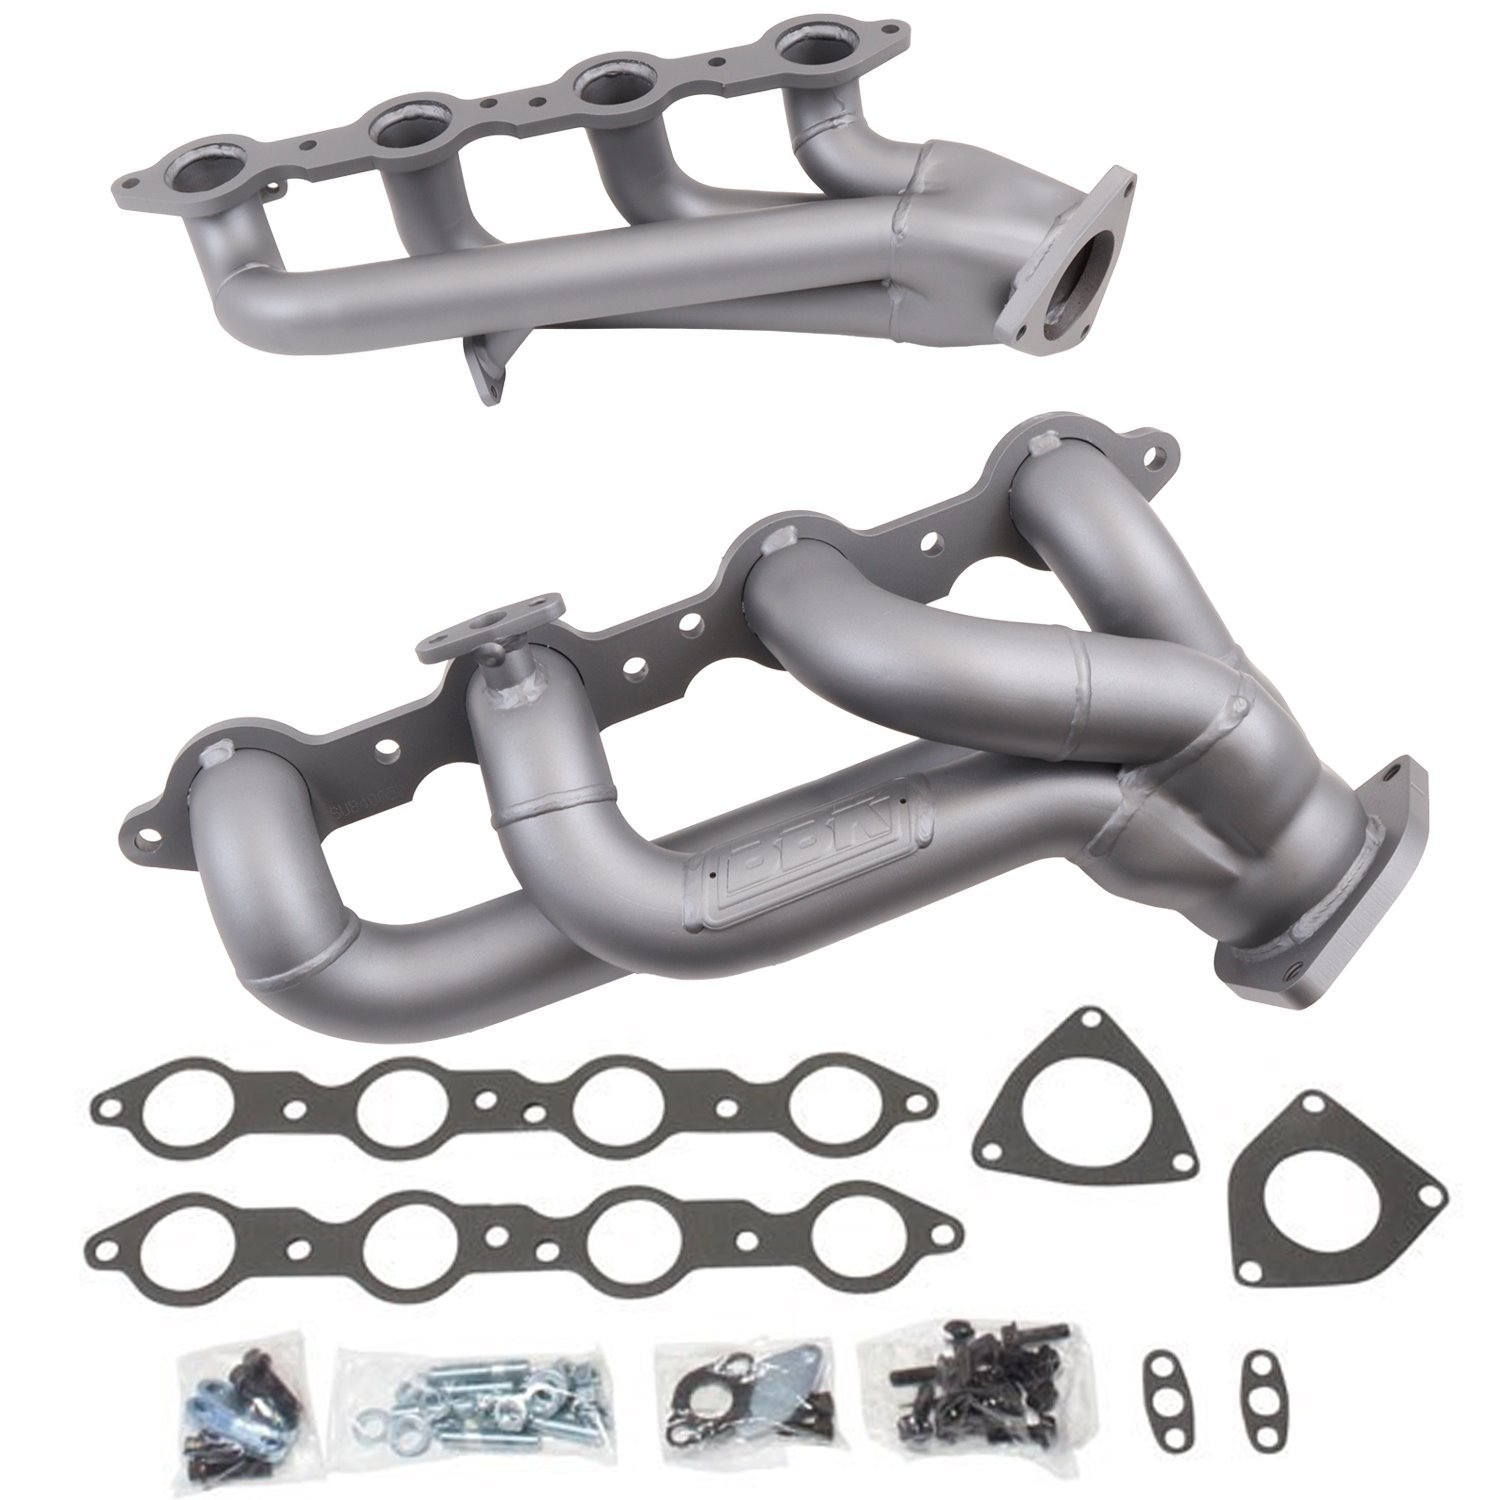 Shorty Exhaust Headers 1999-13 GM Truck/SUV 4.8/5.3L